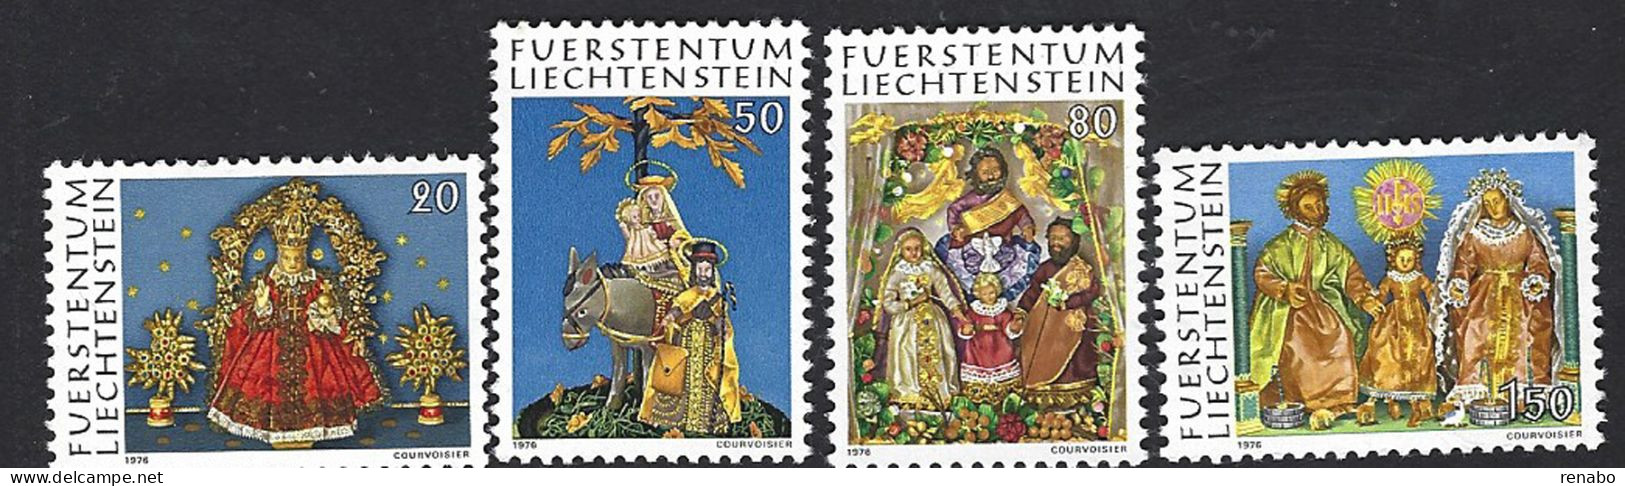 Liechtenstein 1976; Christmas Complete Set, Sacra Famiglia Con Gatto, Holy Family With CAT. - Domestic Cats